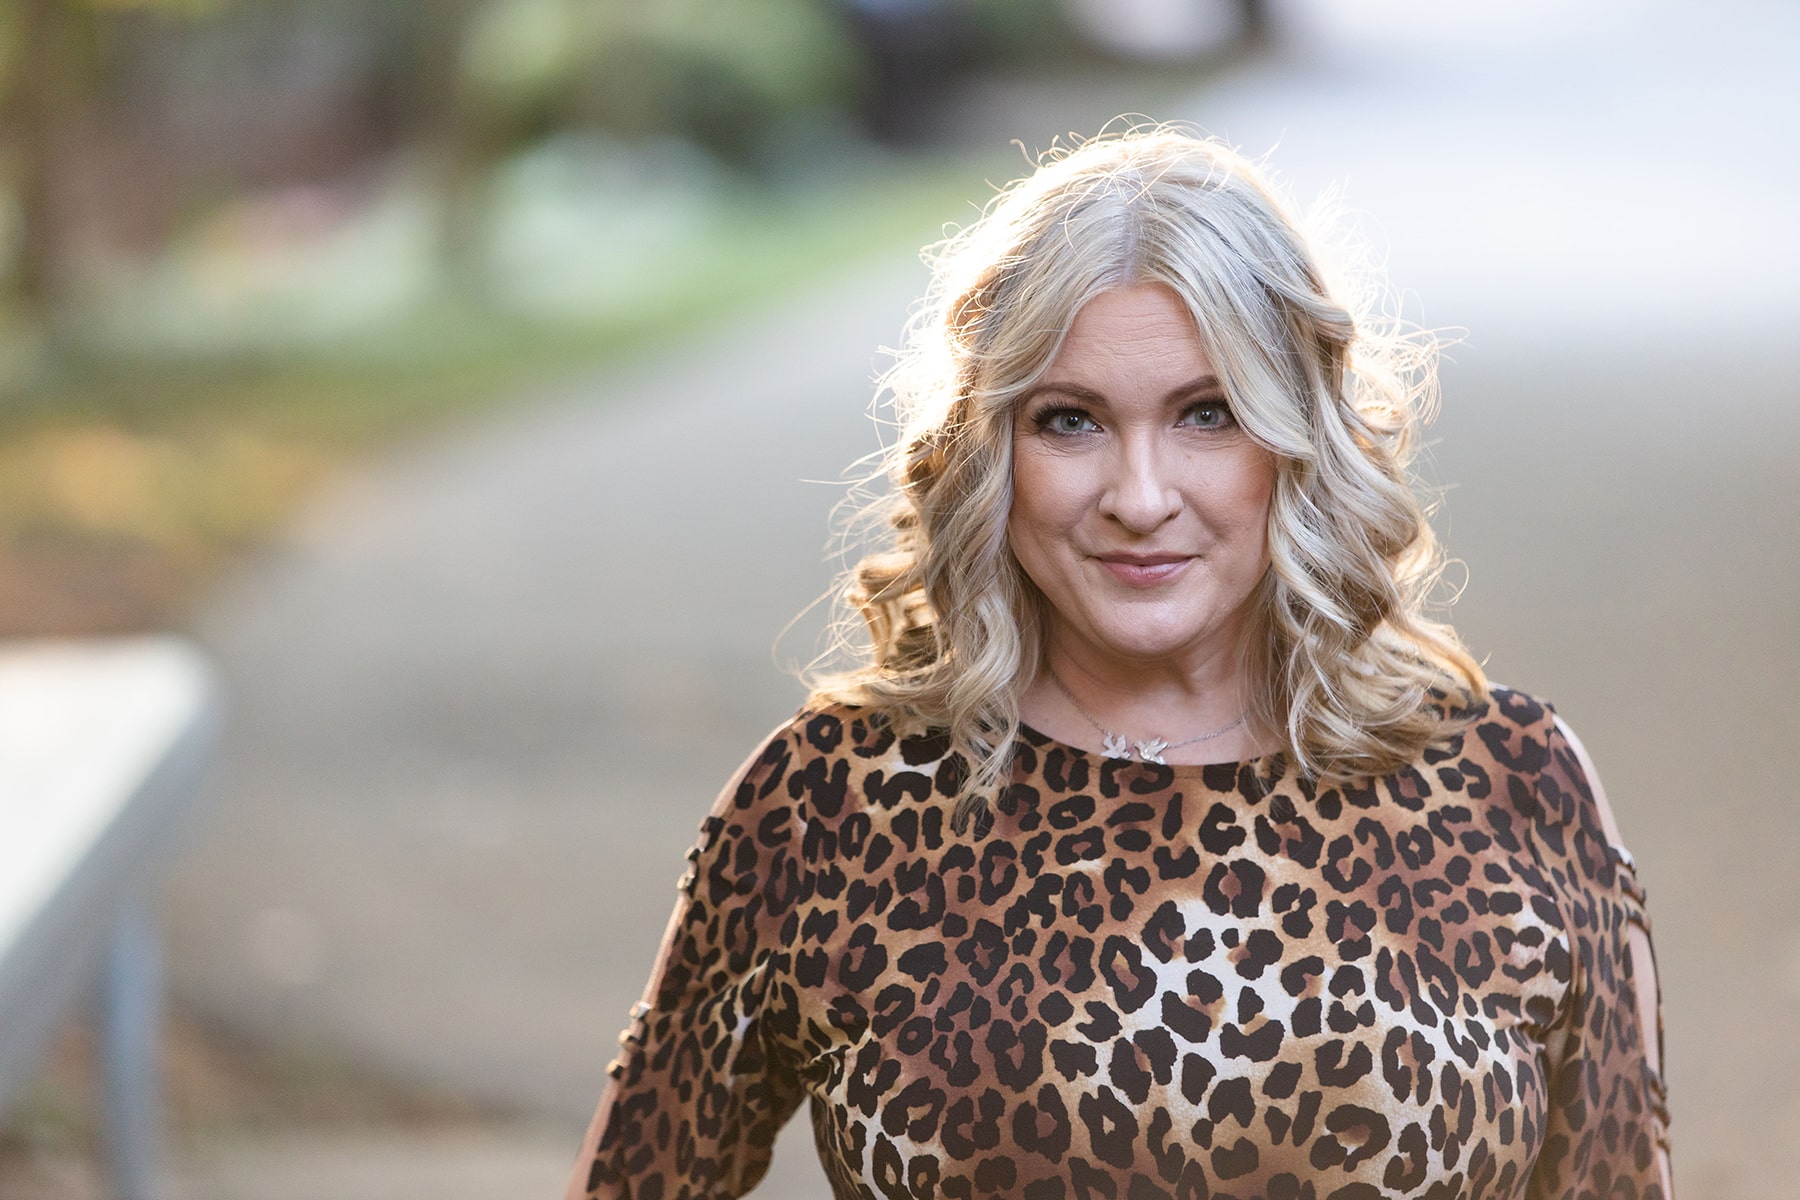 Blonde haired woman wearing a leopard print dress and smirking